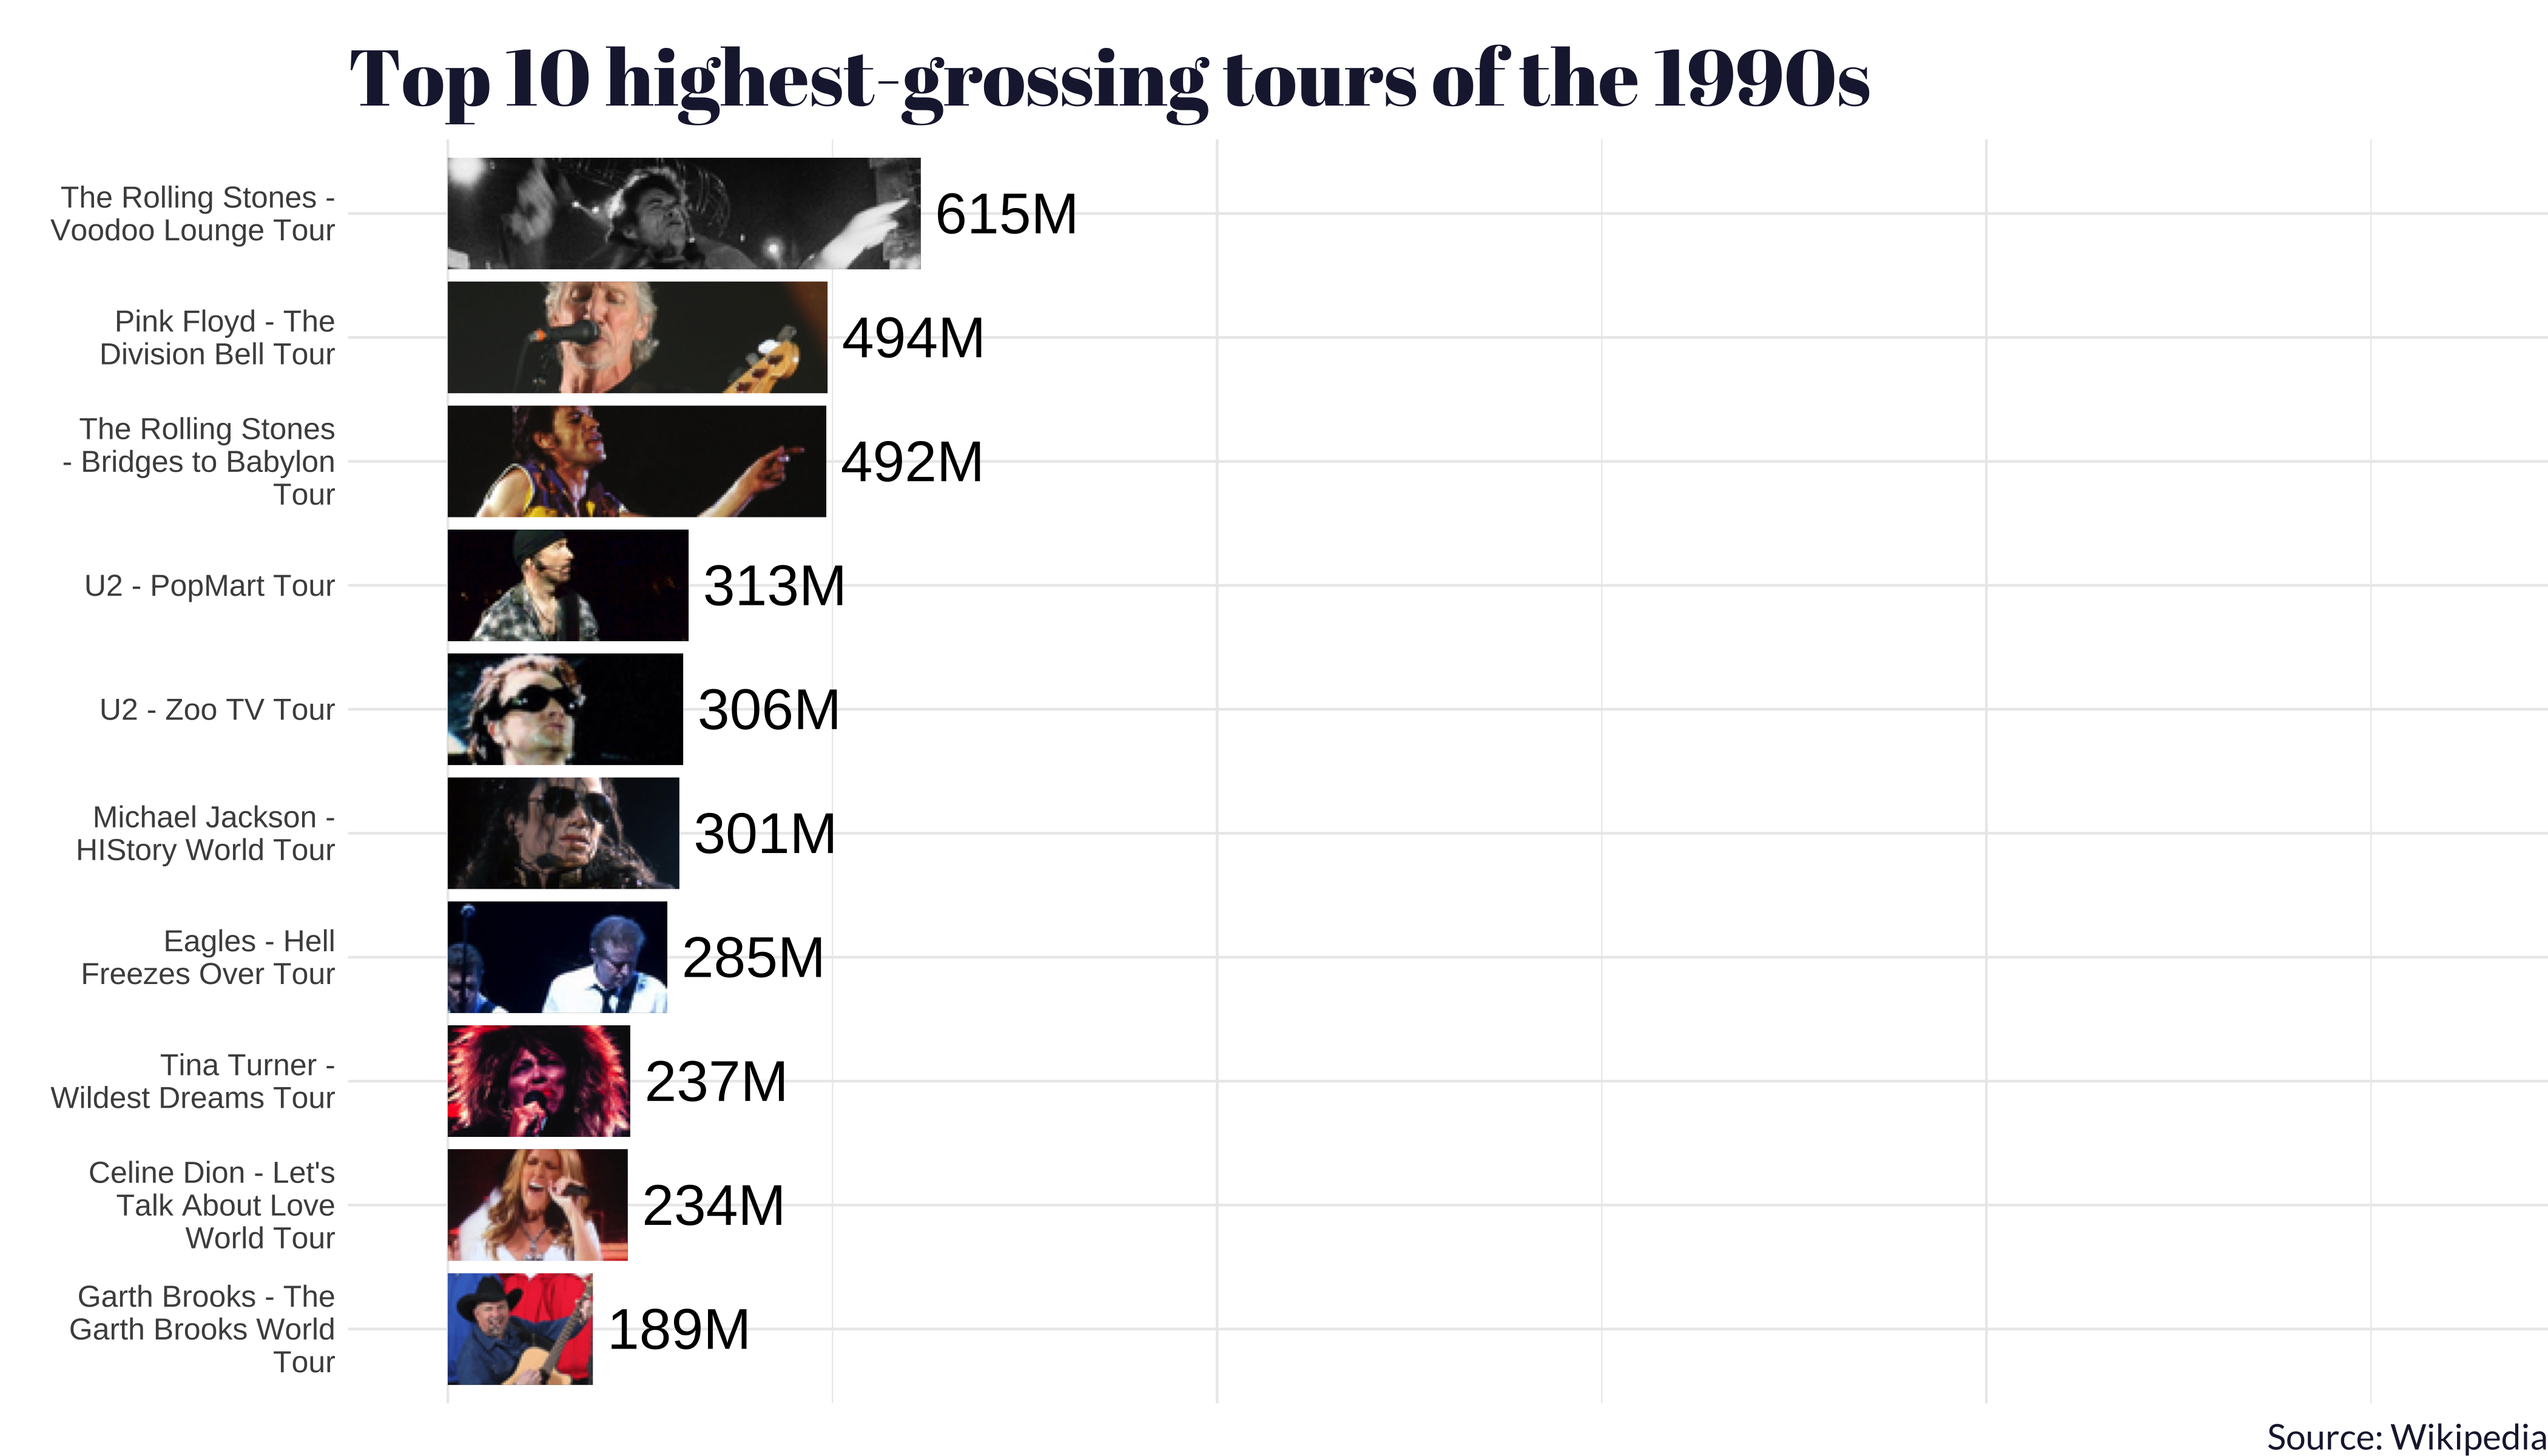 A bar chart titled Top 10 highest-grossing tours of the 1990s with a white background and a list of musical tours alongside the revenue they generated. Each tour is associated with an image of the performing artist. From top to bottom, the tours and their revenues are The Rolling Stones - Voodoo Lounge Tour: $615M, Pink Floyd - The Division Bell Tour: $494M, The Rolling Stones - Bridges to Babylon Tour: $492M, U2 - PopMart Tour: $313M, U2 - Zoo TV Tour: $306M, Michael Jackson - HIStory World Tour: $301M, Eagles - Hell Freezes Over Tour: $285M, Tina Turner - Wildest Dreams Tour: $237M, Celine Dion - Let's Talk About Love World Tour: $234M, Garth Brooks - The Garth Brooks World Tour: $189M. On the right side of each tour name and revenue figure, there is a corresponding photograph of the artist or band performing live. The source of the data is credited to Wikipedia at the bottom of the image.